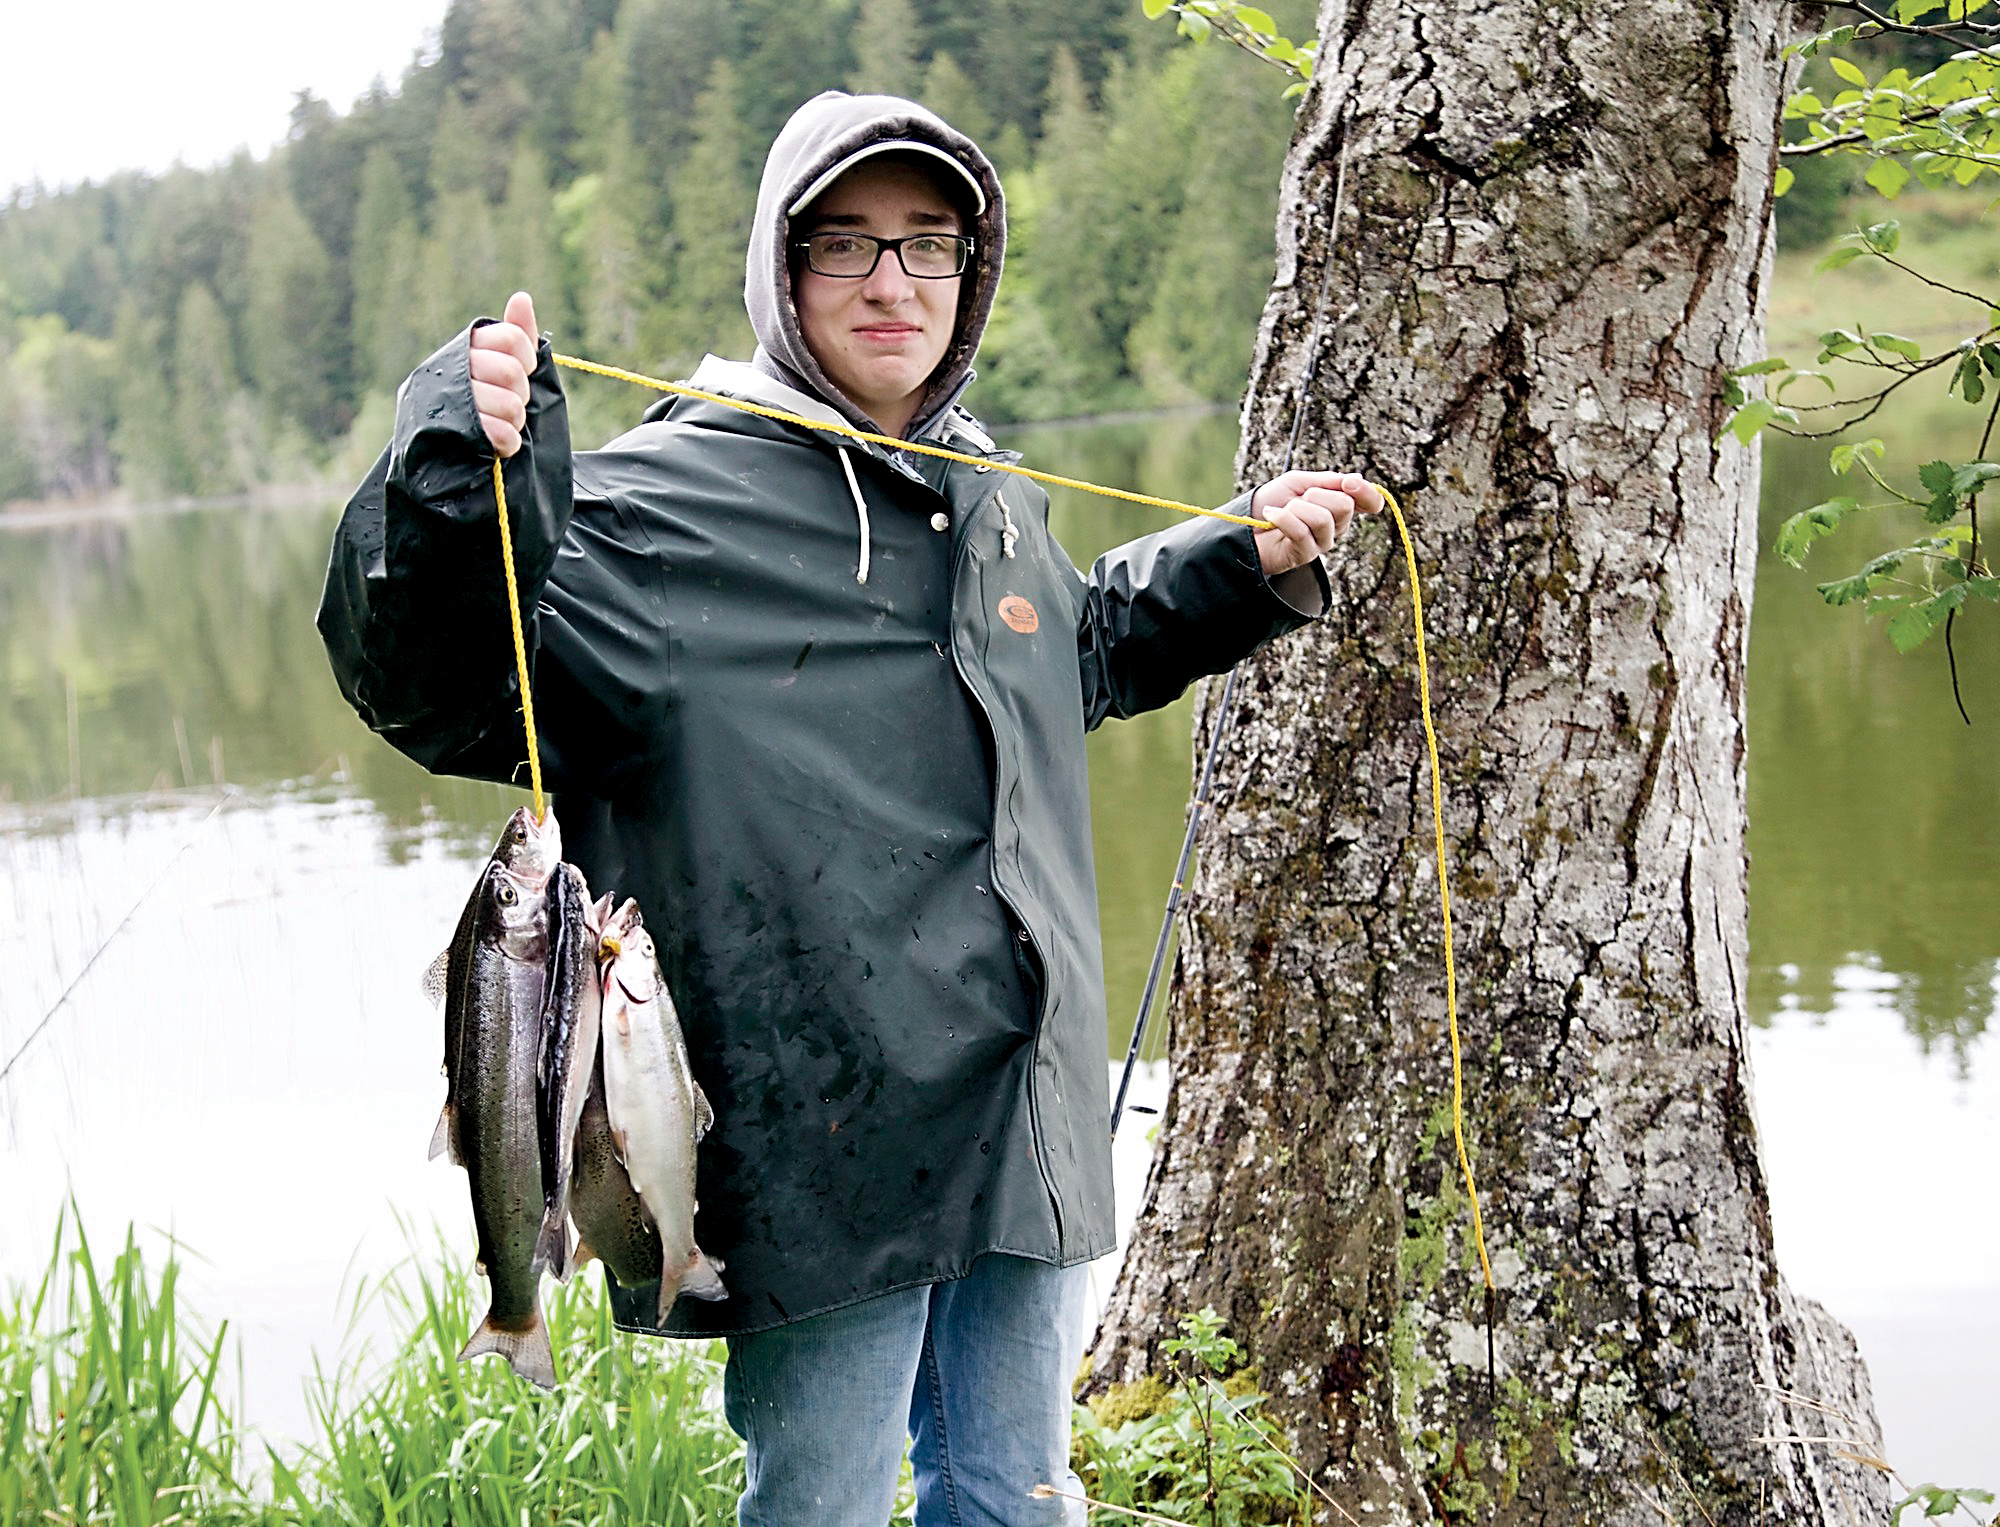 Christopher DeAscentiis of Hansville shows off the six trout he caught in the first hour of opening day for fishing Saturday at Anderson Lake in Chimacum. —Photo by Steve Mullensky/for Peninsula Daily News ()